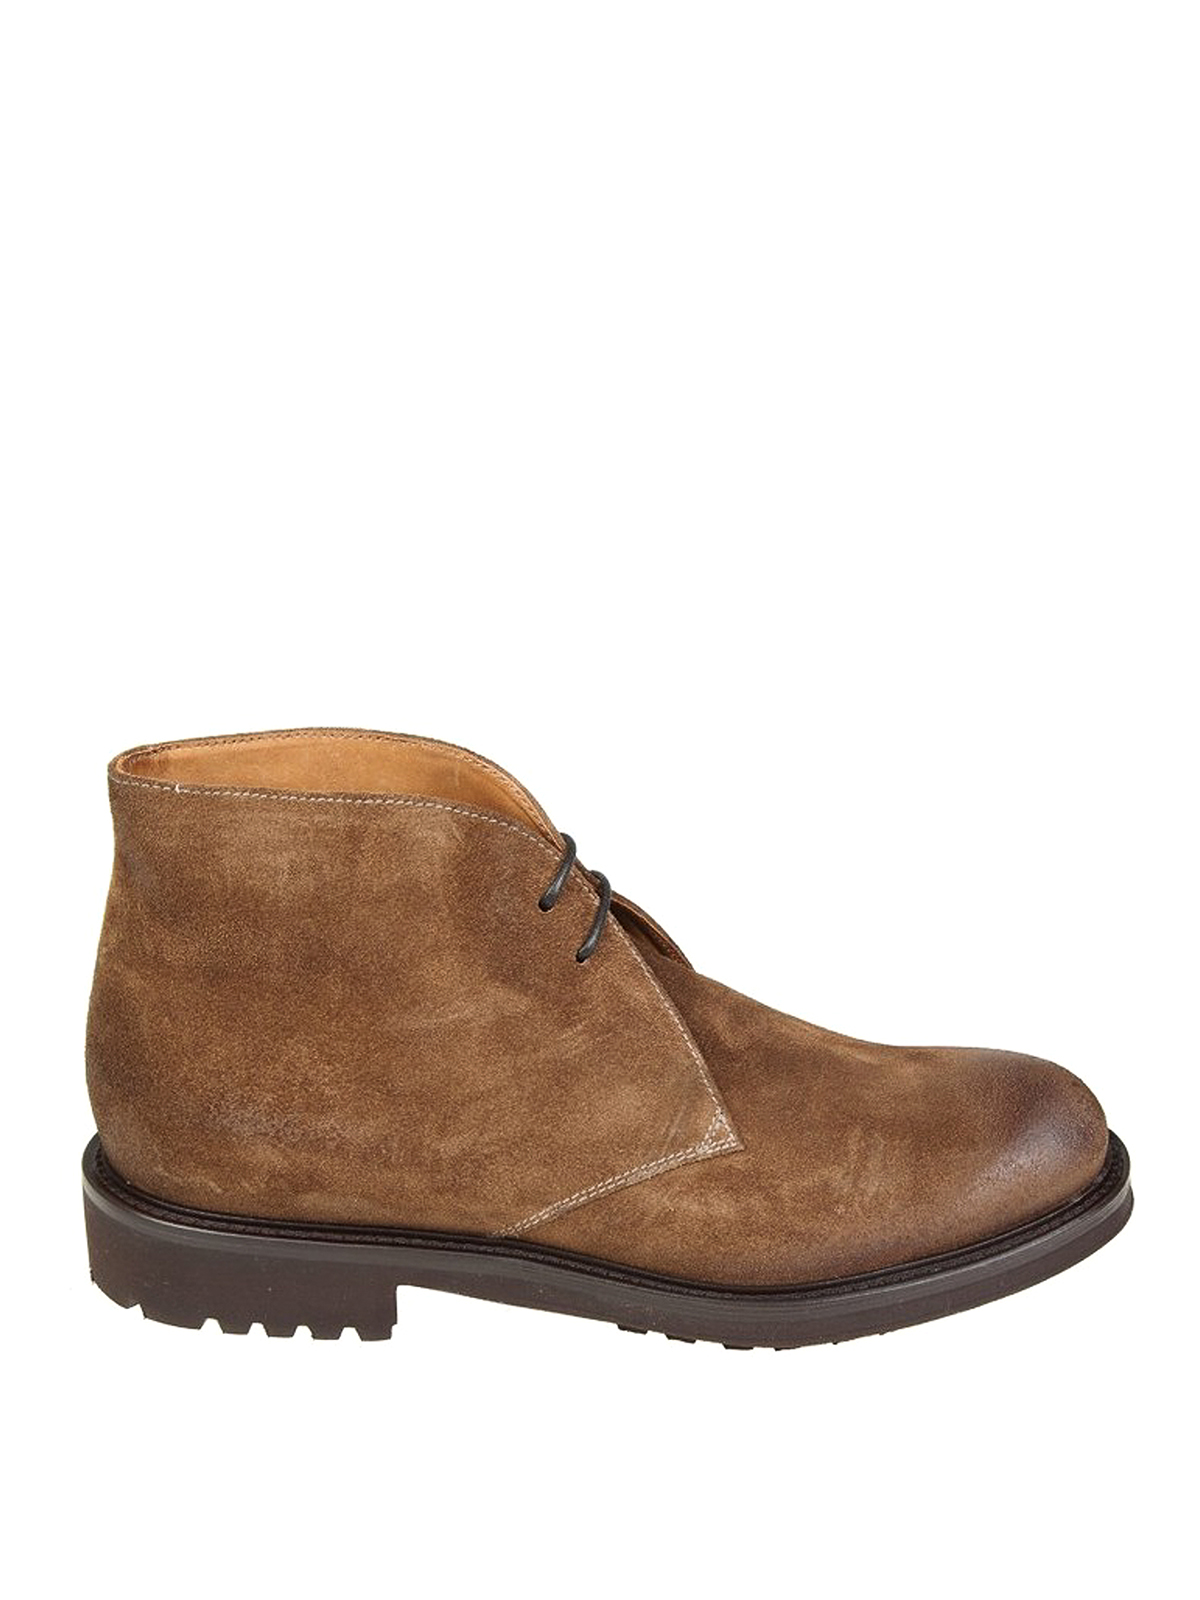 Doucal's Doucals Ankle Boot In Tobacco Suede In Marrón Claro